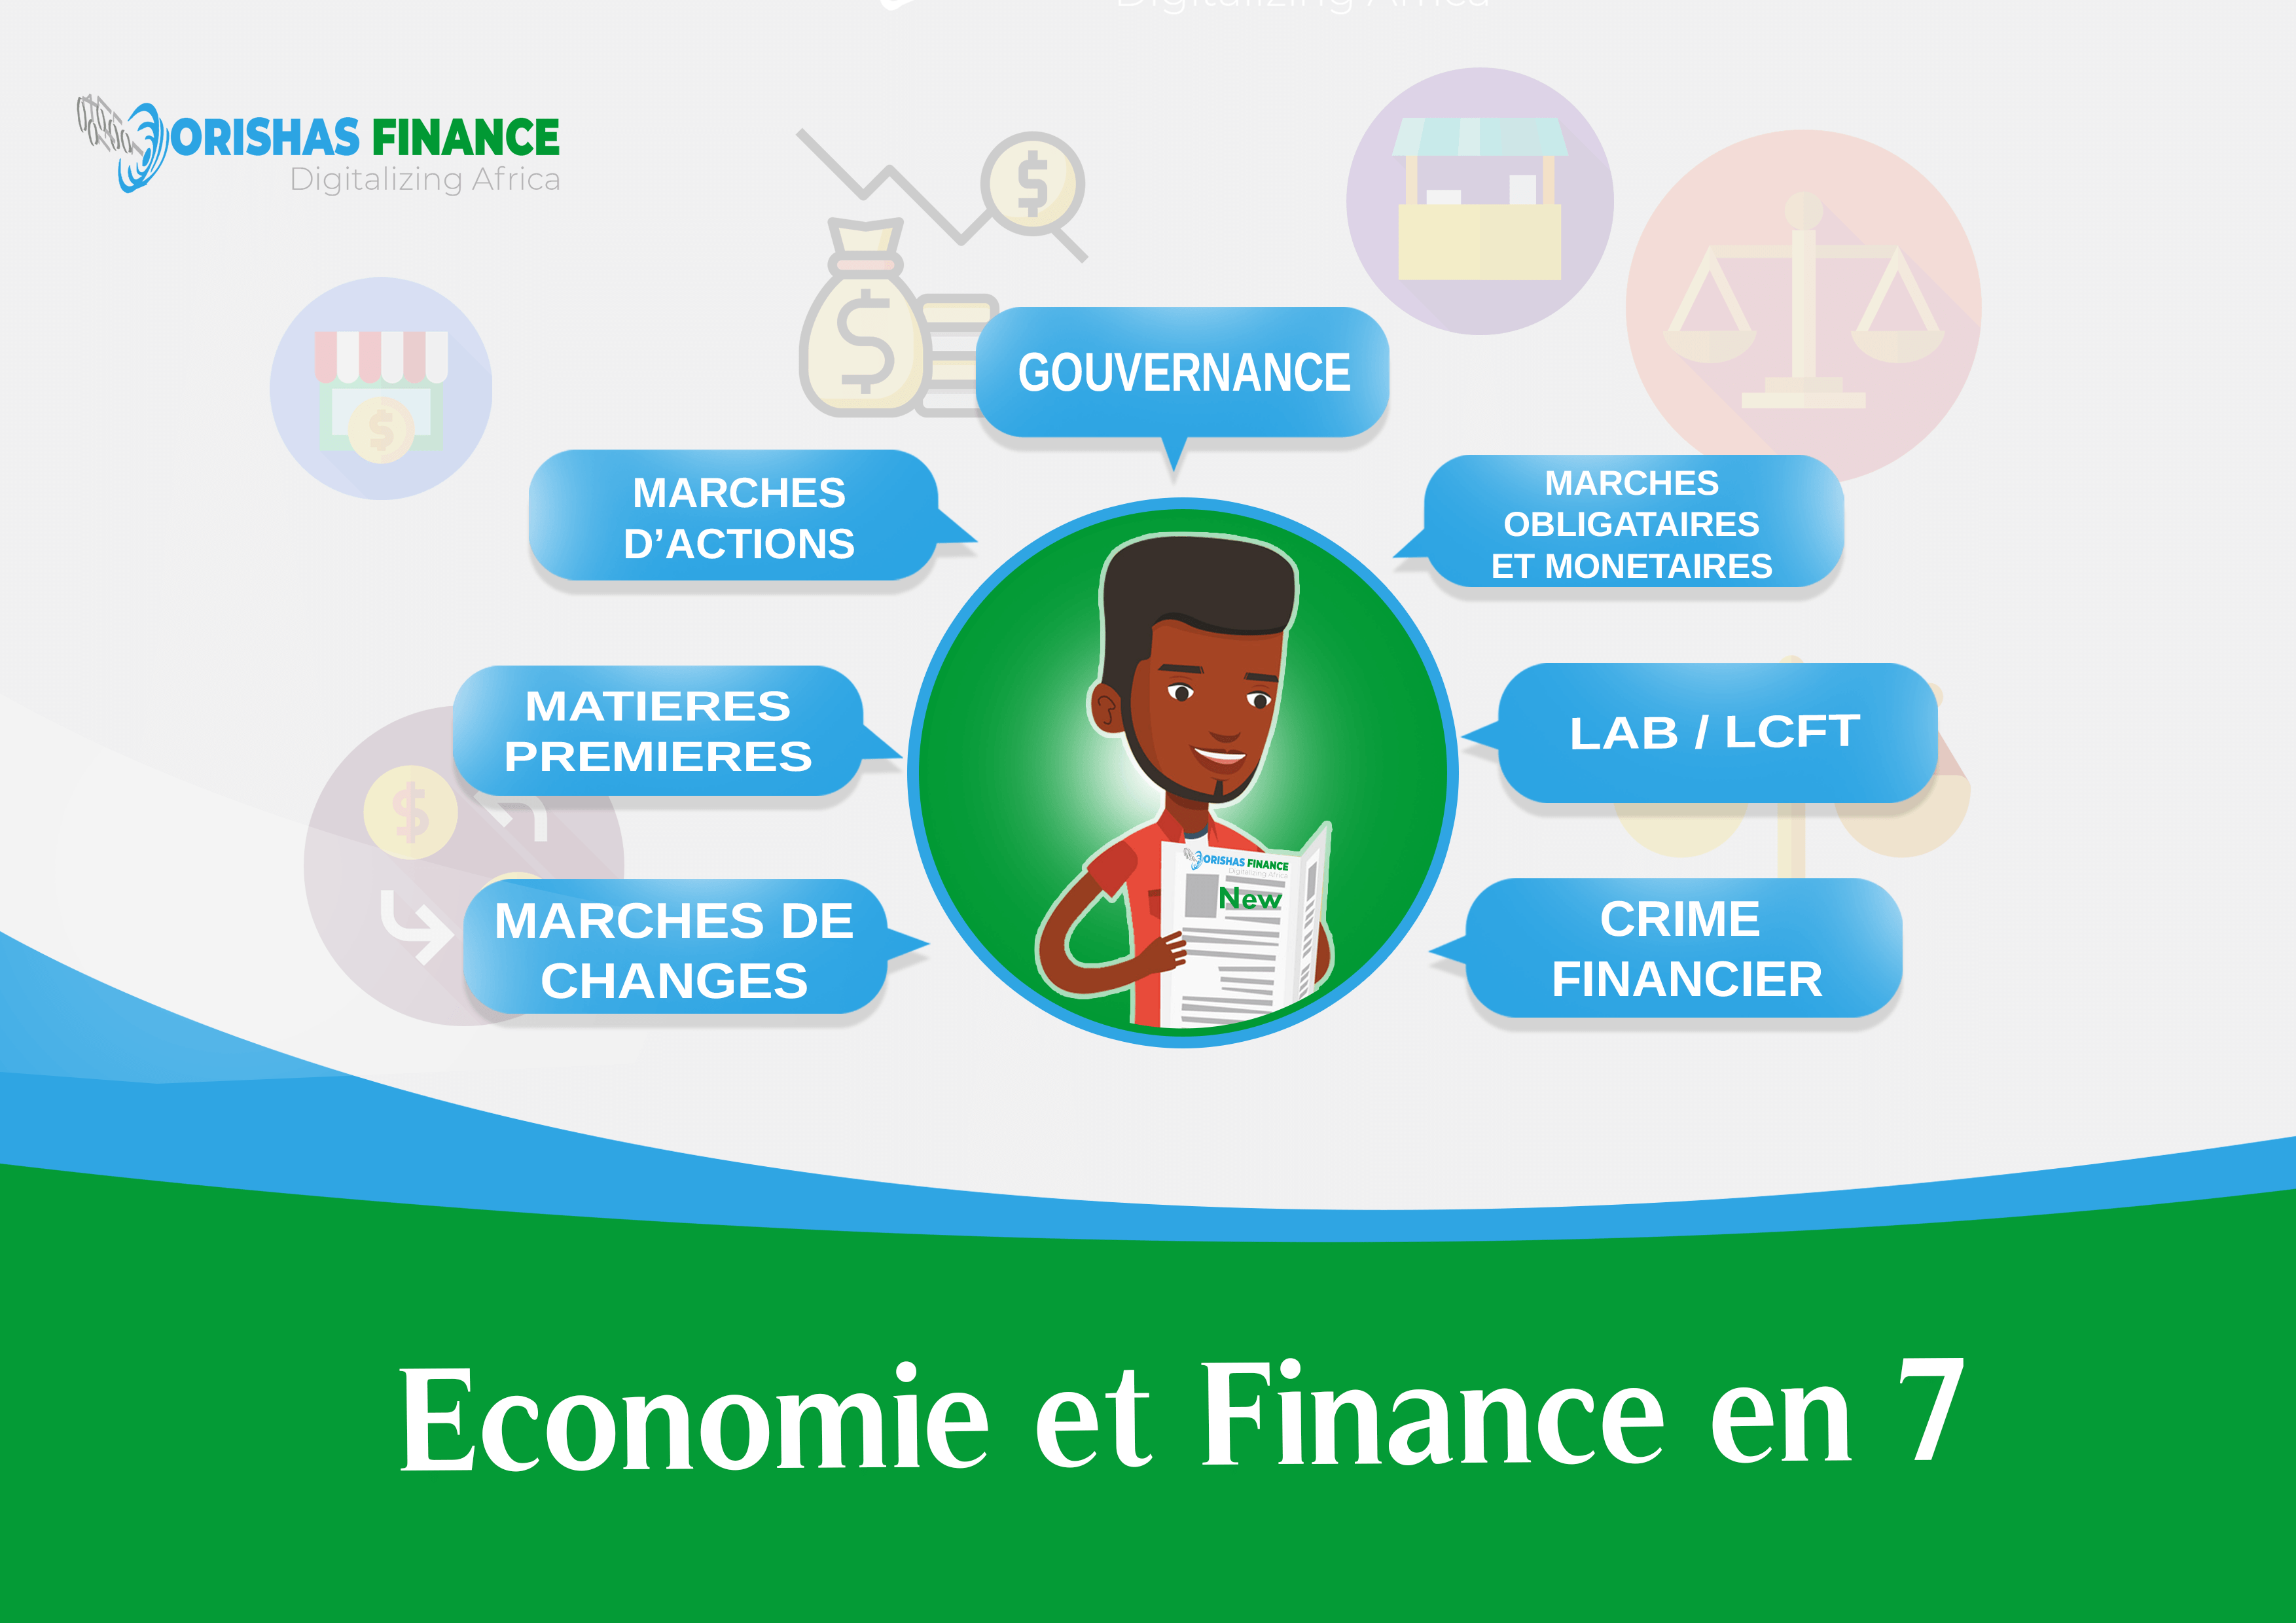  Economy and finance in 7 from July 12 to 16, 2021 